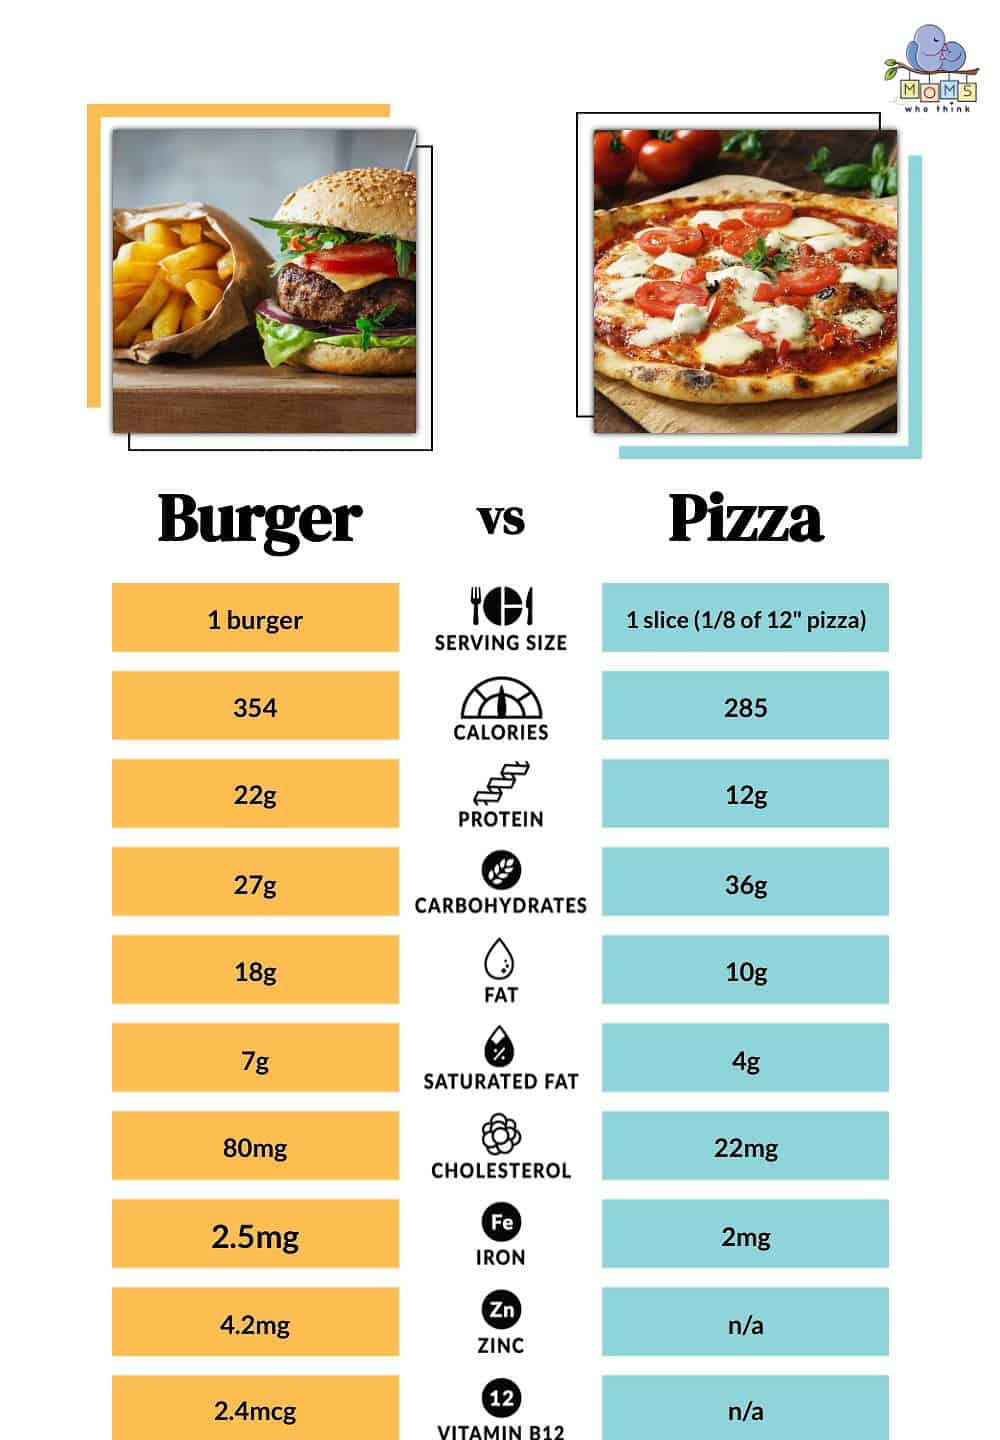 Burger vs Pizza Nutritional Facts